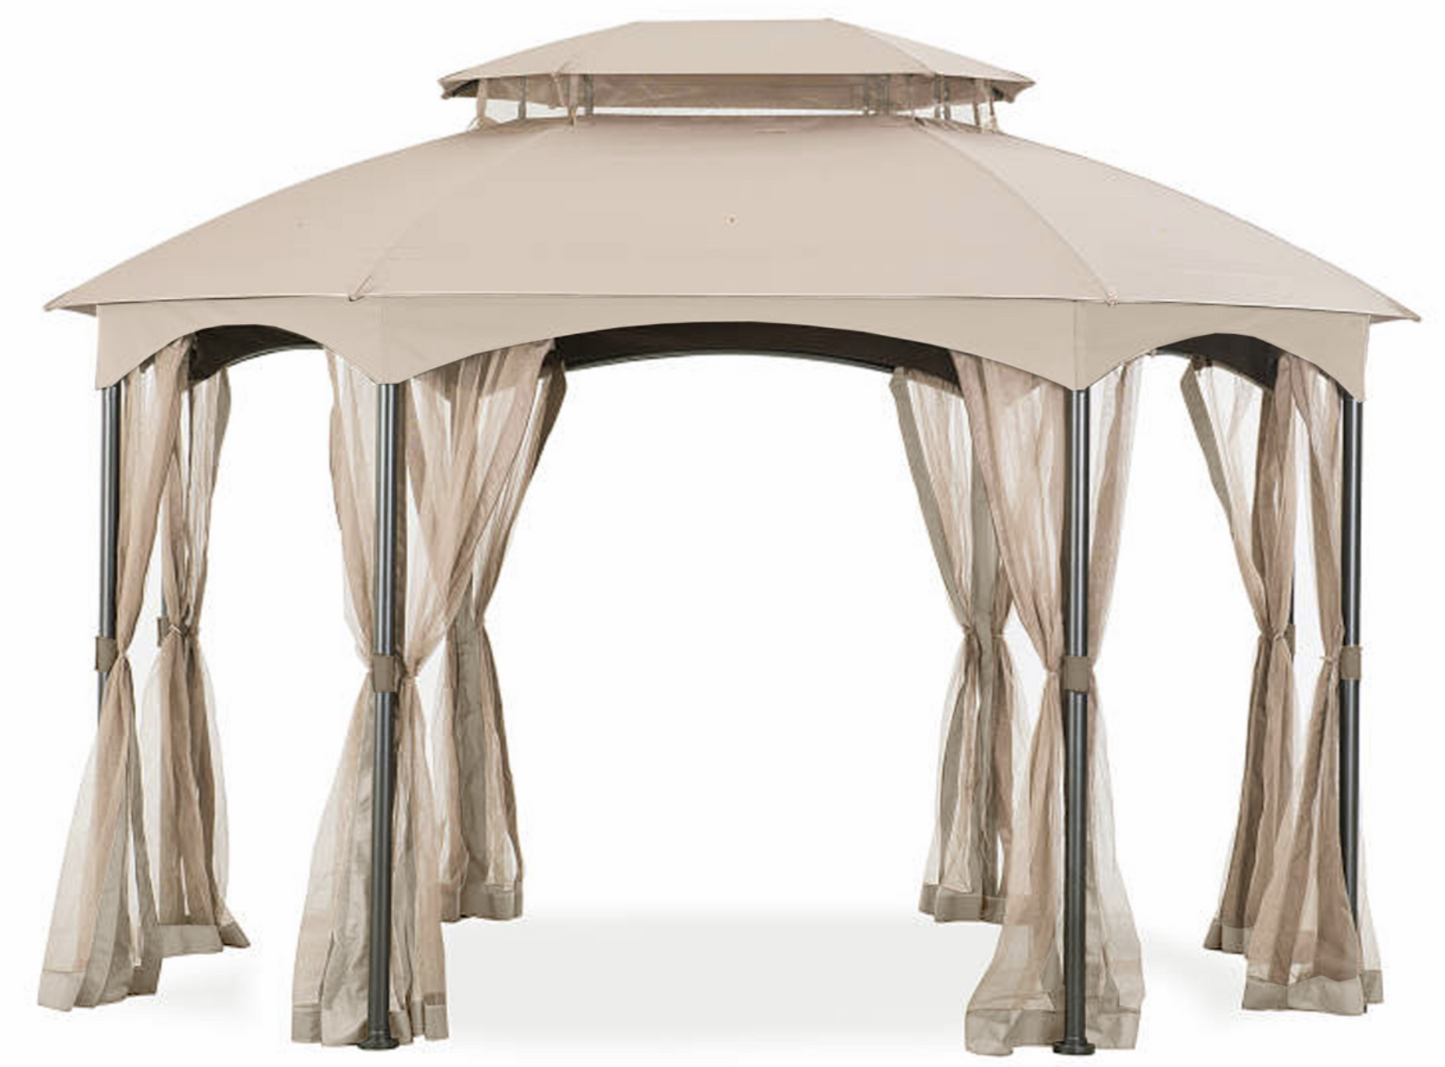 Replacement Canopy and netting for L-GZ1138PST The Oval Gazebo - RIPLOCK 350 - Beige.